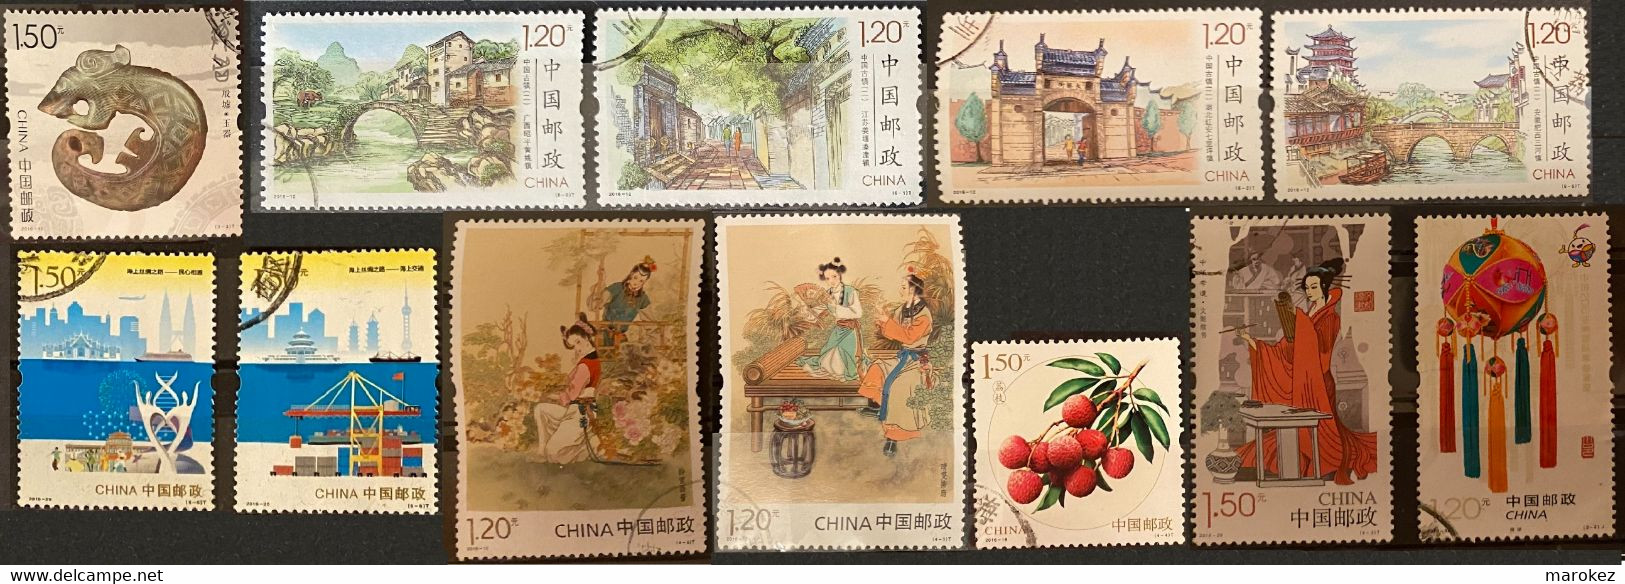 CHINA PRC 2016 12 Postally Used Stamps MICHEL # 4789-90,4793-94,4800-01,4809,4813,4835-36,4841,4861 - Used Stamps